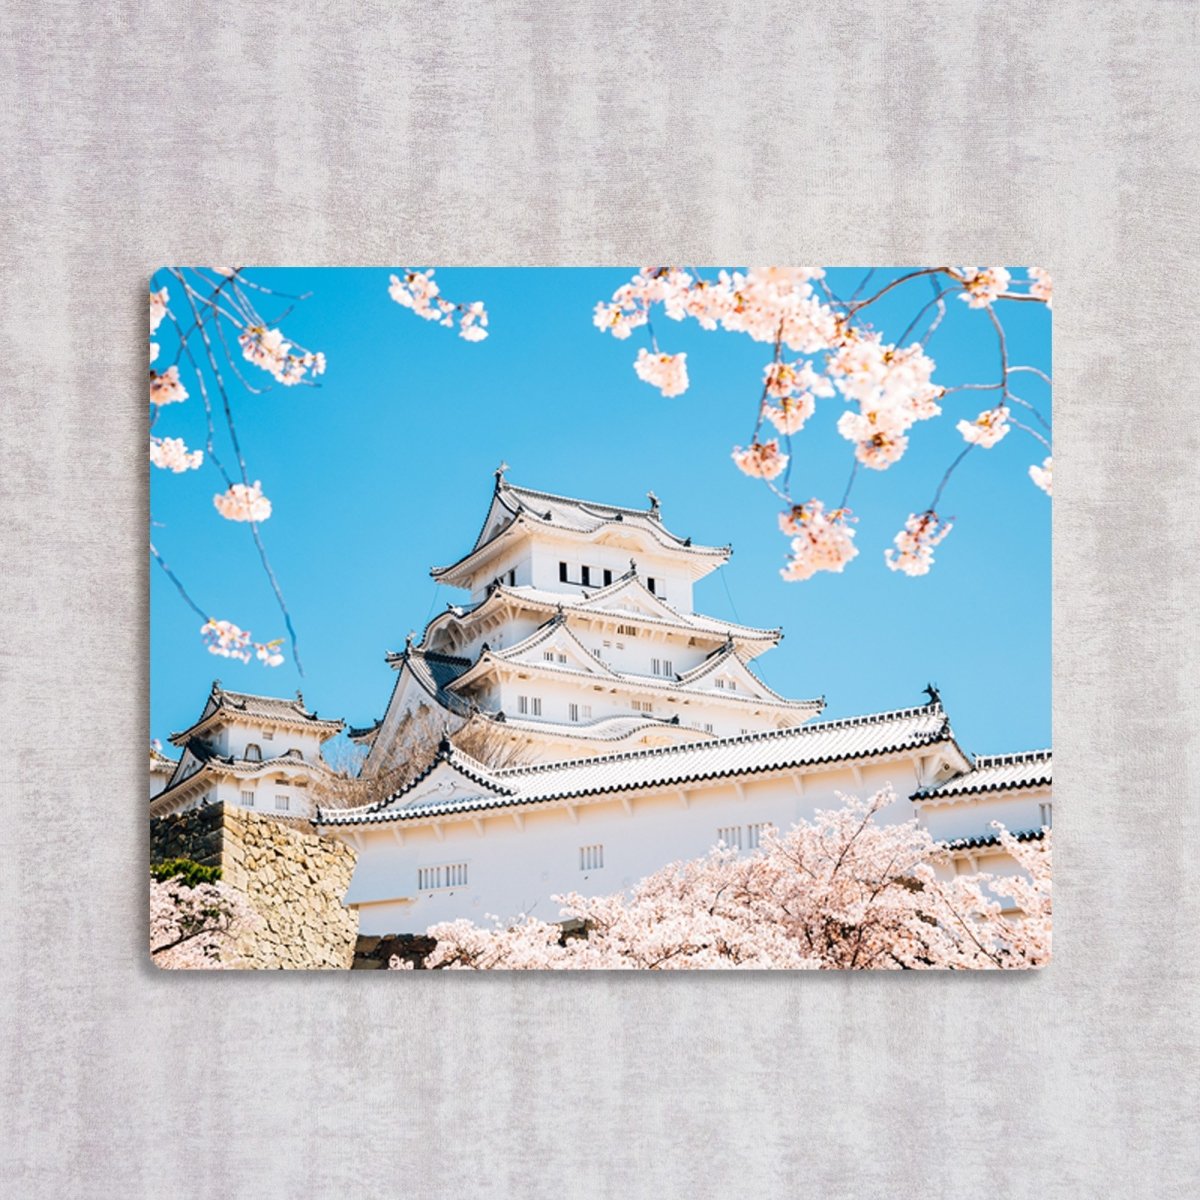 HIMEJI CASTLE WITH SPRING CHERRY BLOSSOMS, JAPAN - cmzart